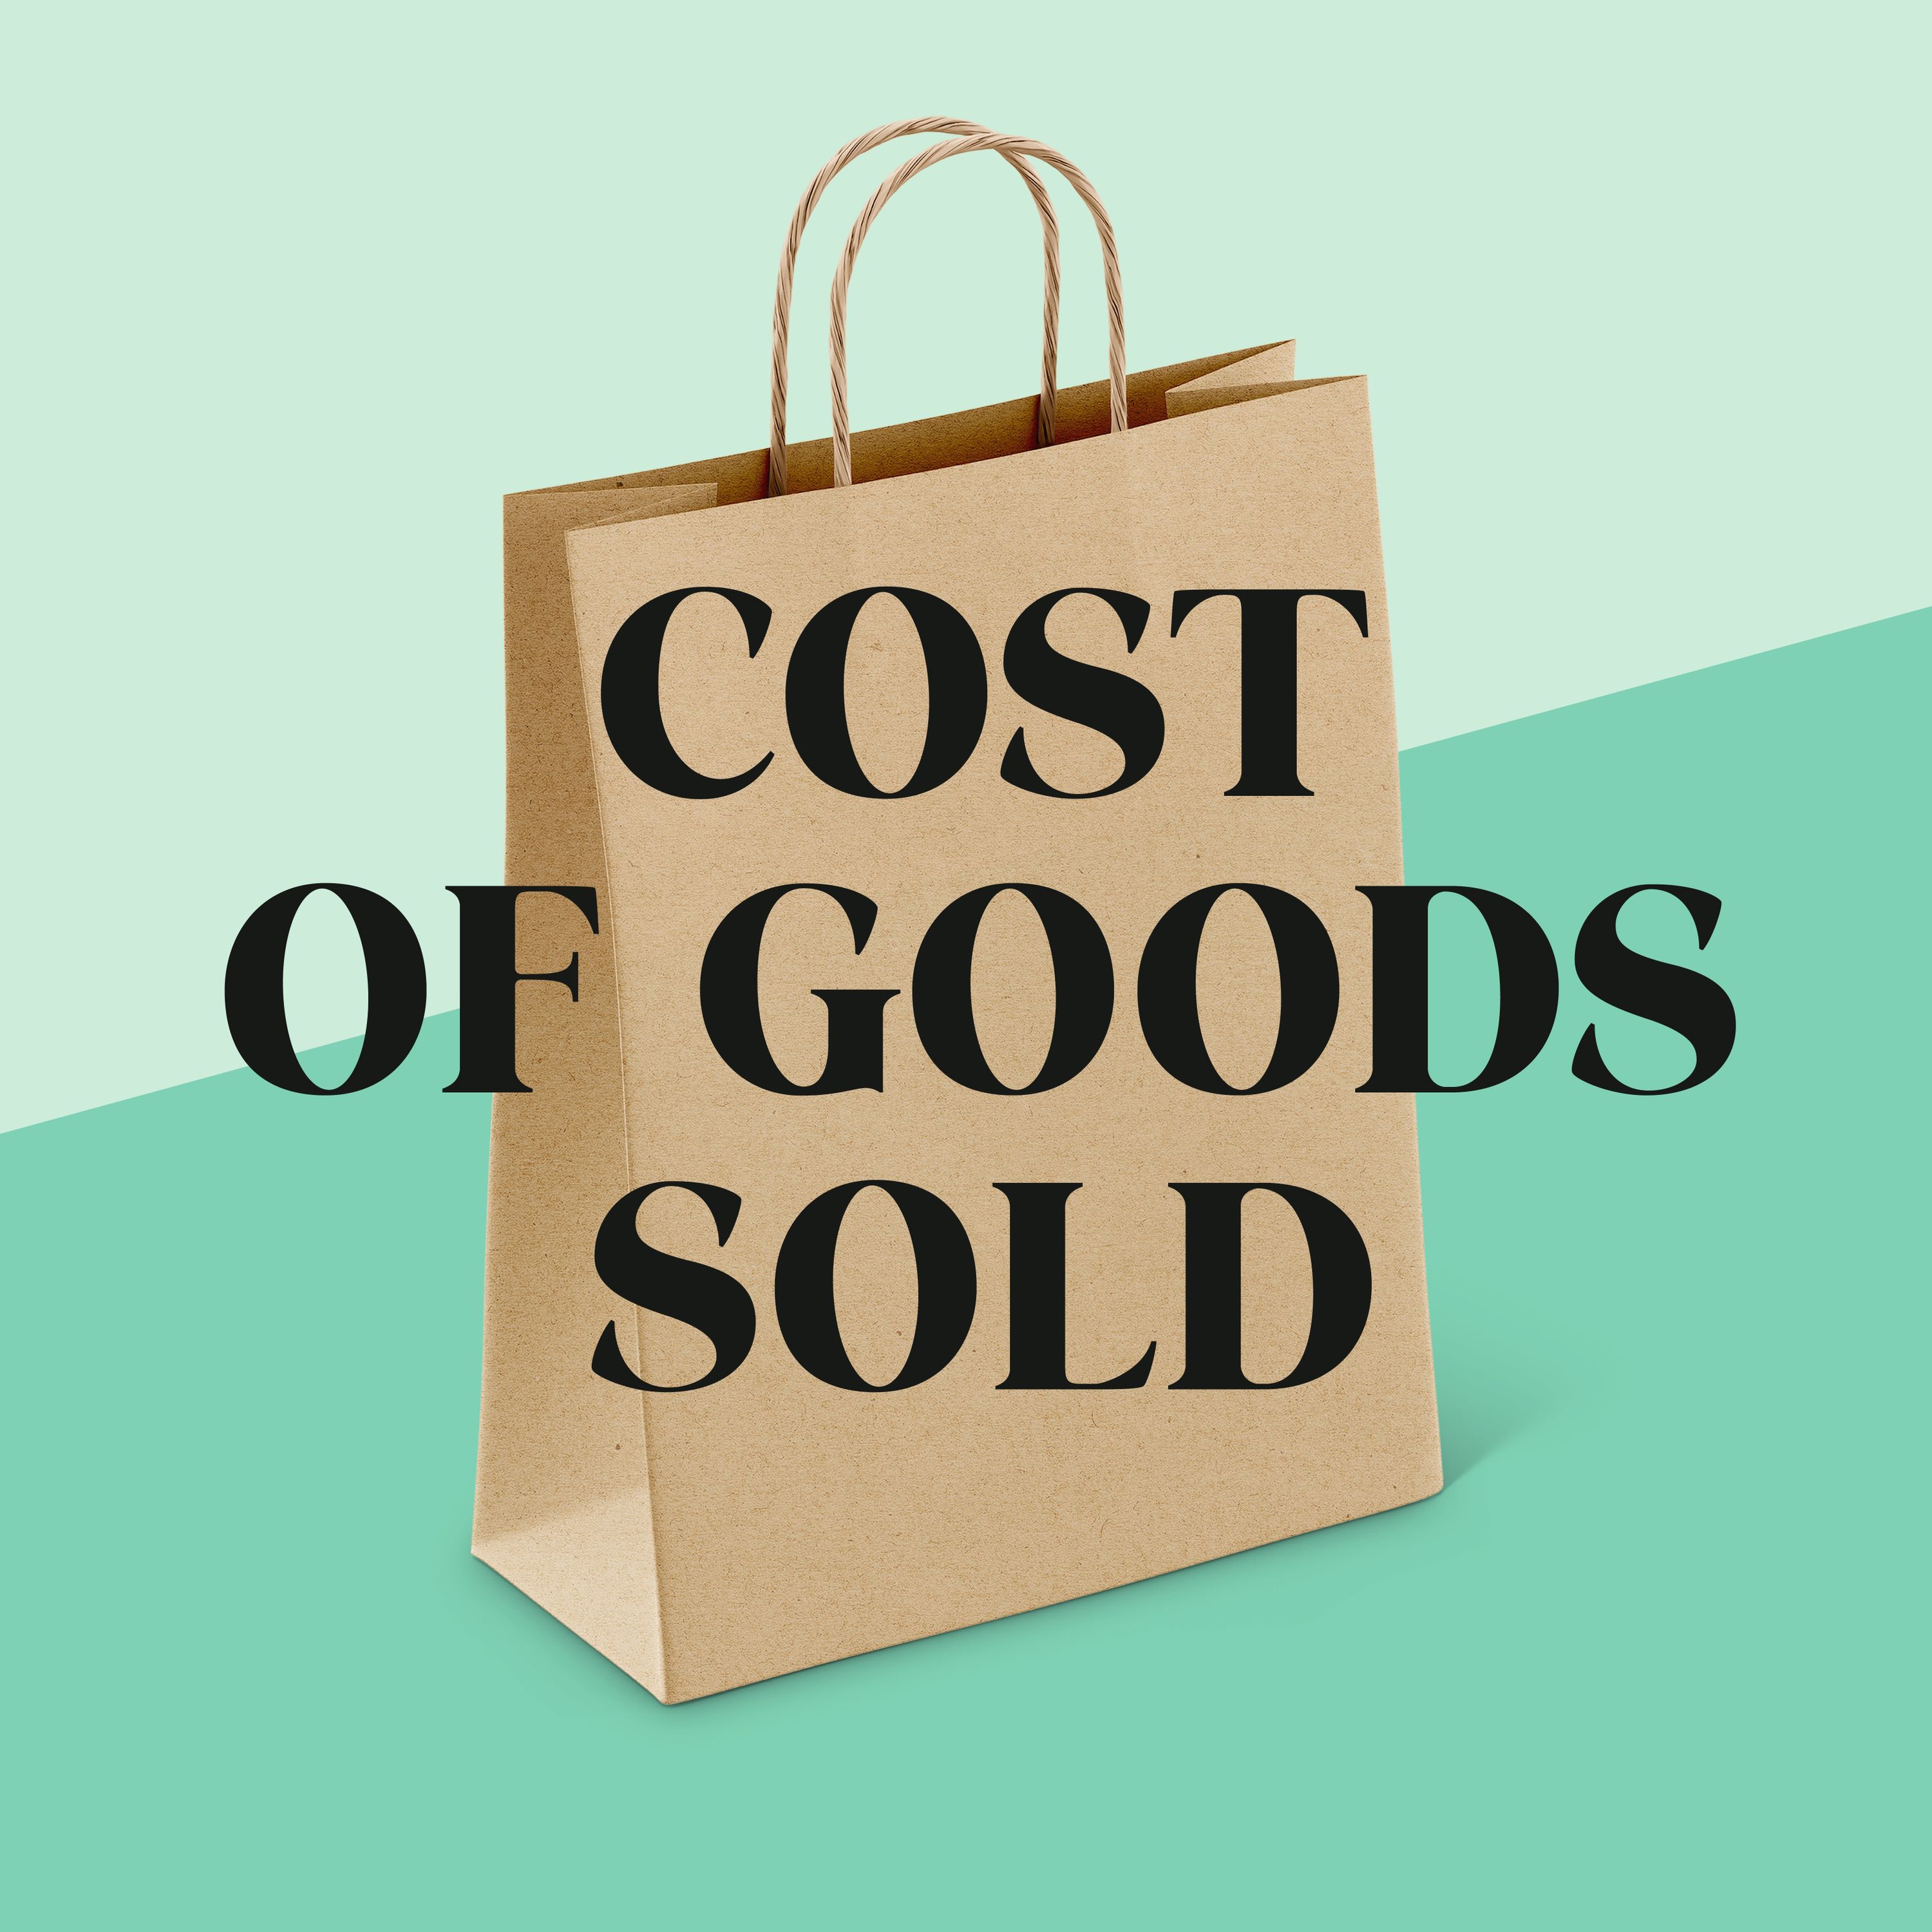 Show artwork for the Cost Of Goods Sold